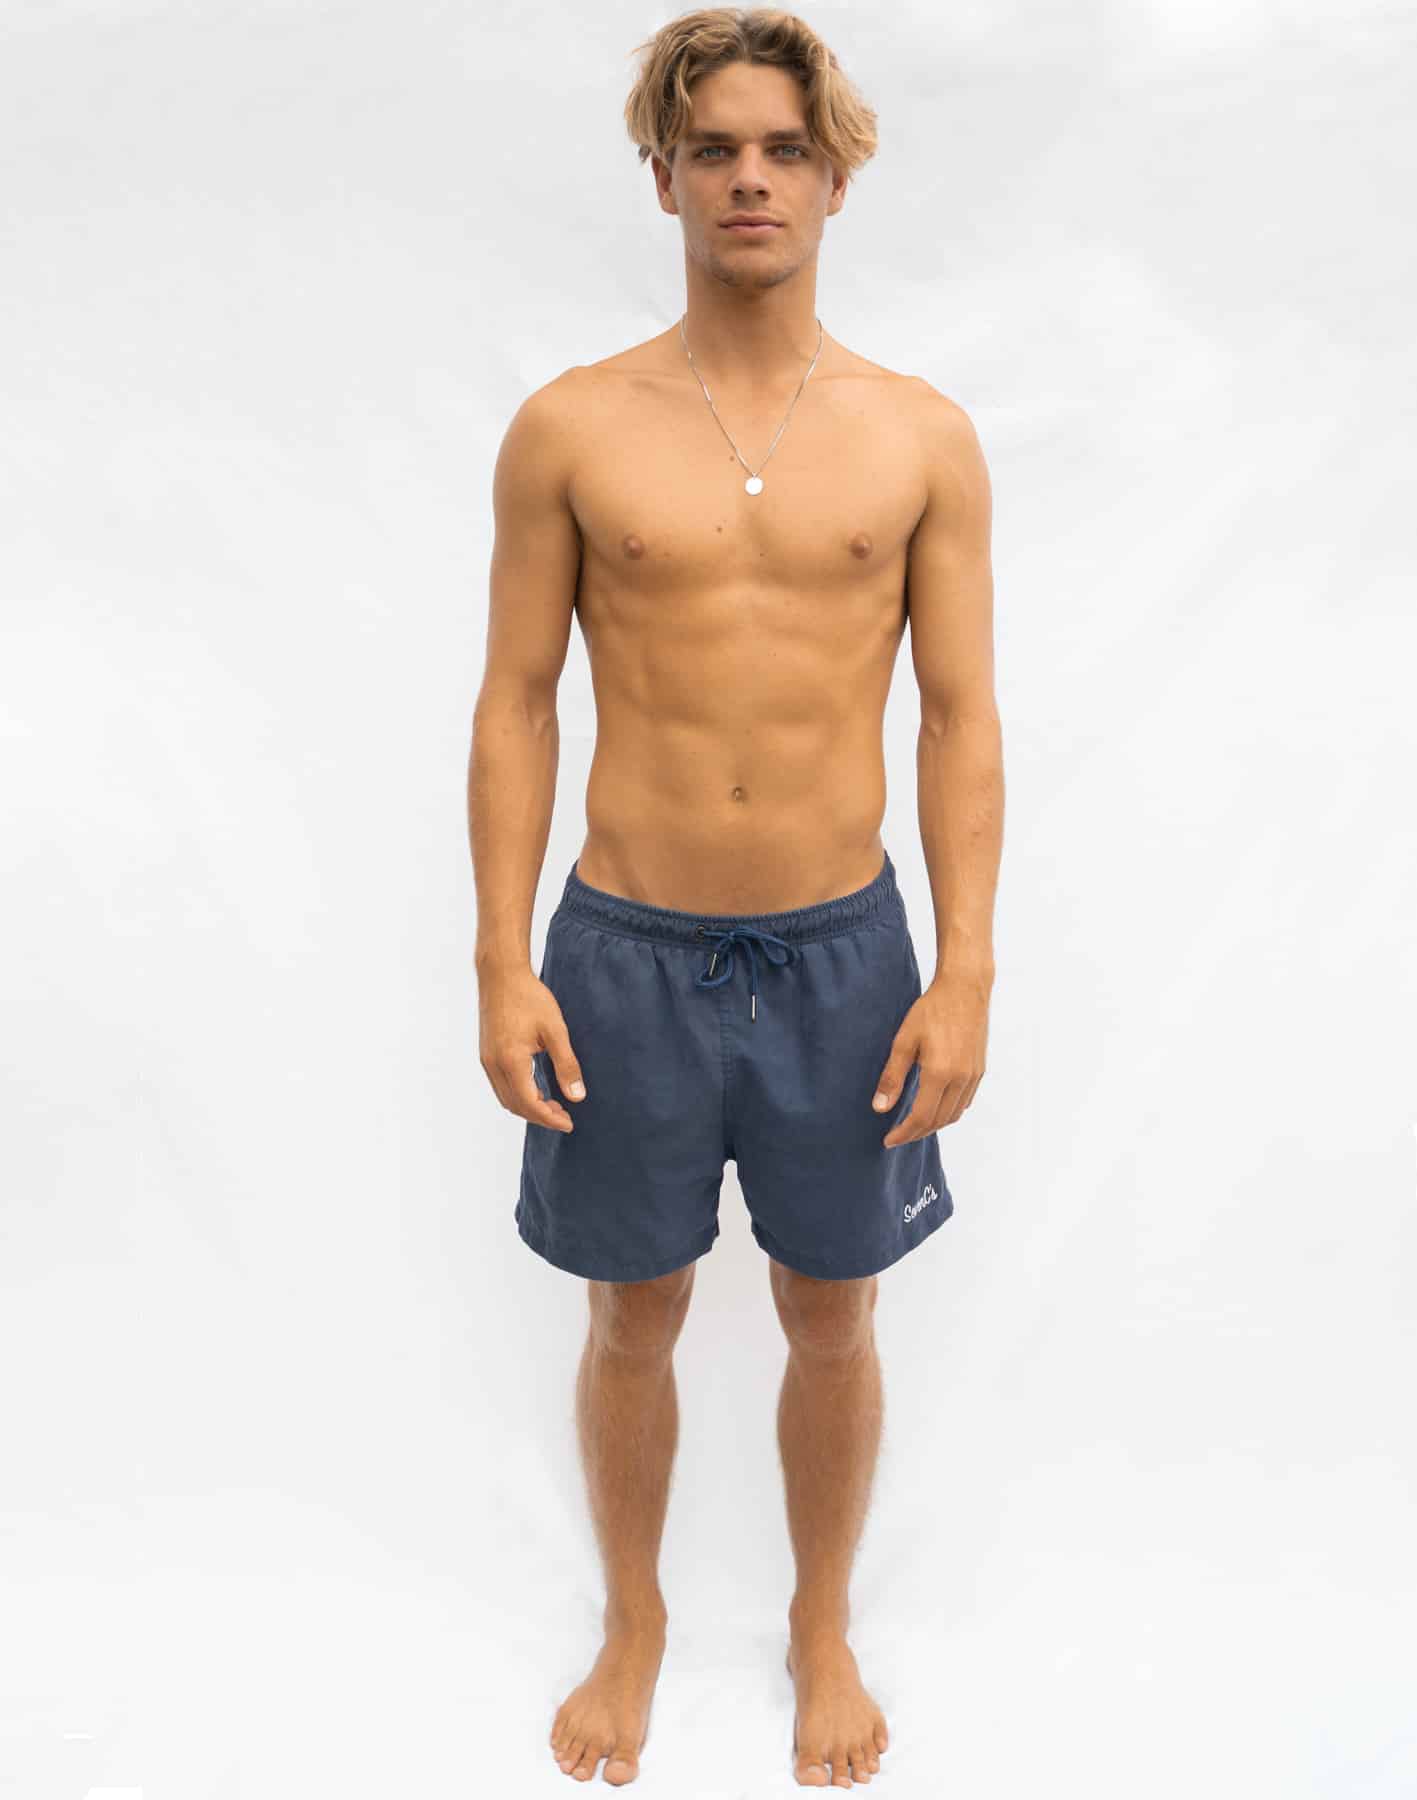 SevenC's Men's Recycled Polyester Shorts in Navy Blue on Model